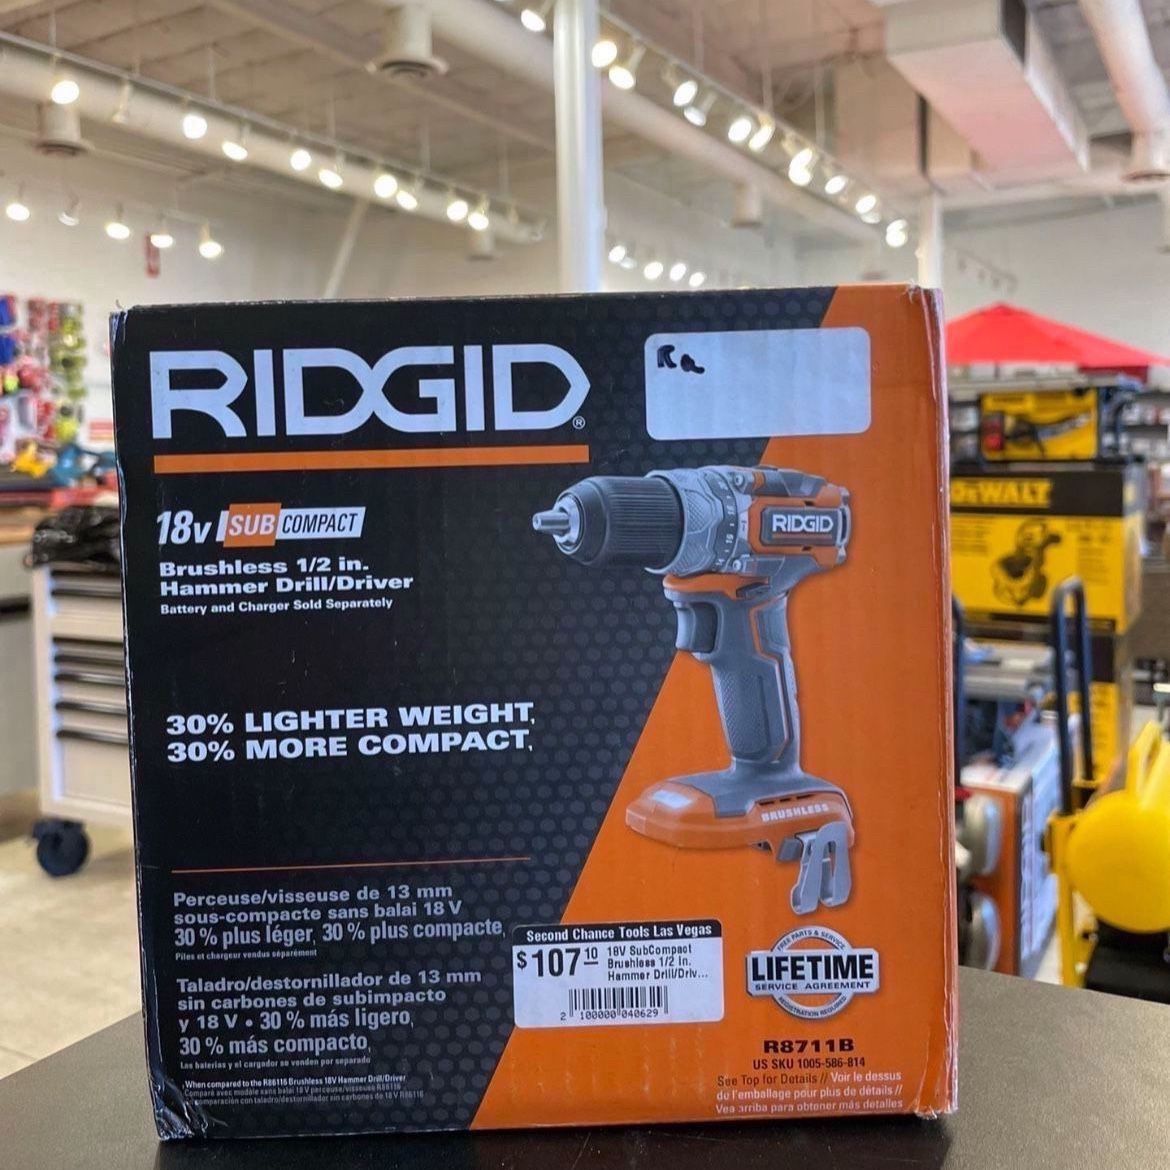 RIDGID 18V SUBCOMPACT BRUSHLESS 1/2 IN. HAMMER DRILL/DRIVER (TOOL ONLY) R8711B